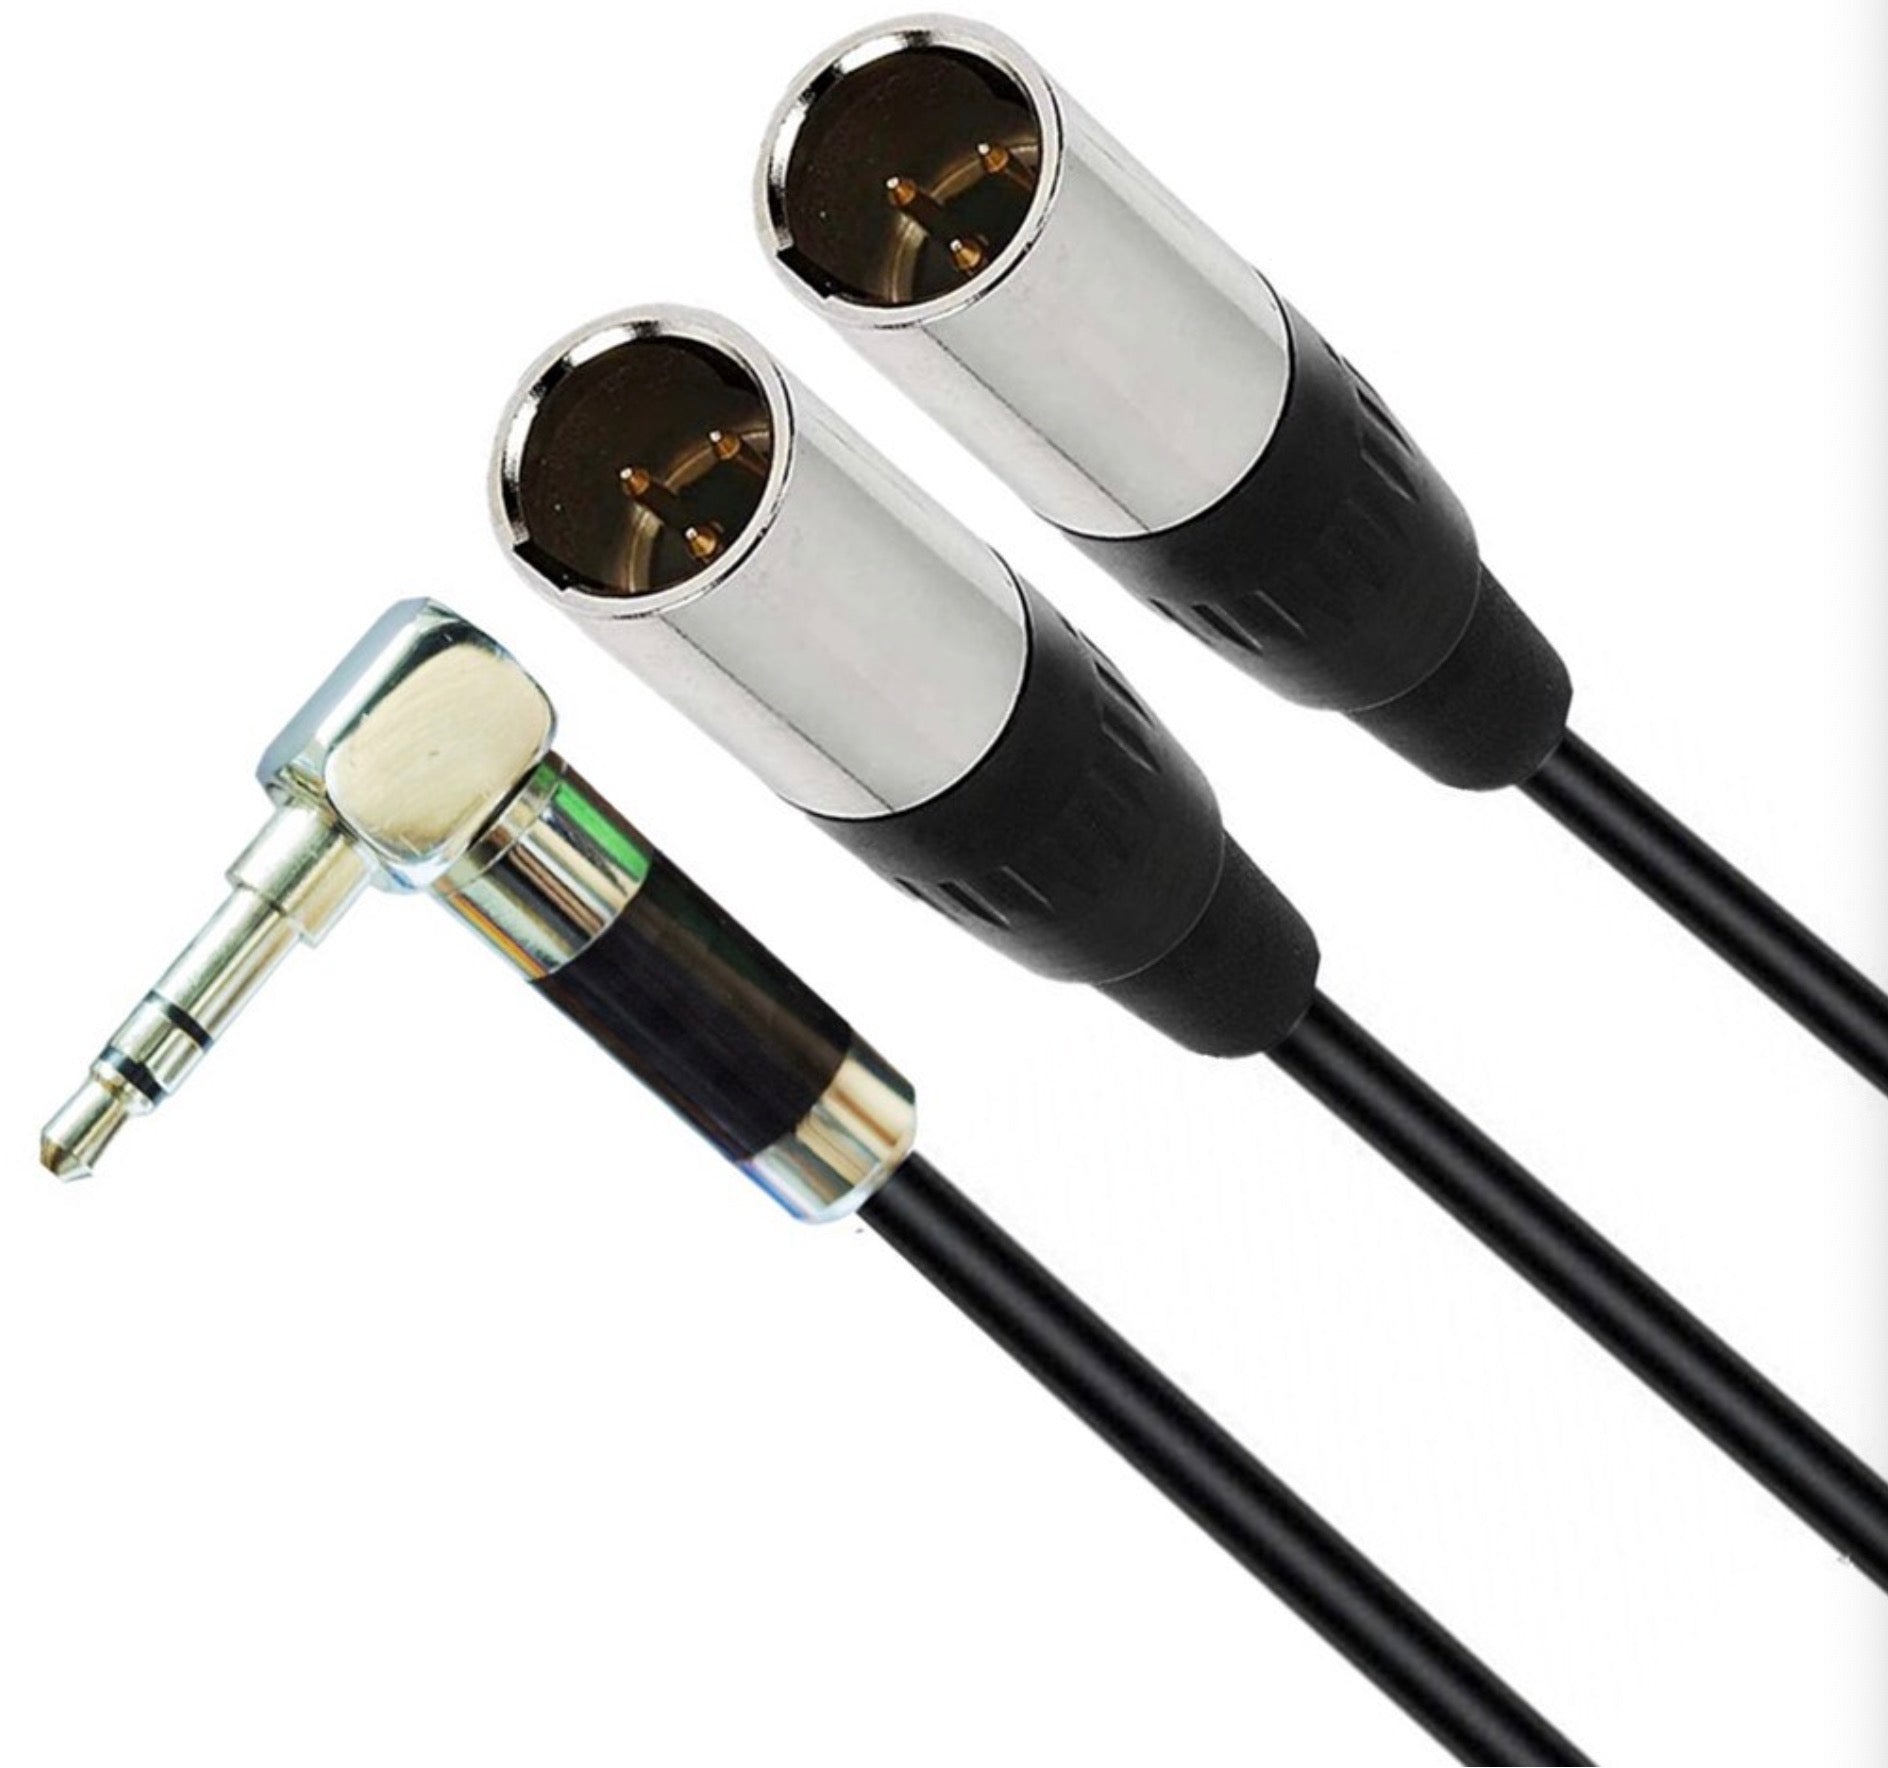 Dual Mini 3-pin XLR Male to 3.5mm 1/8" TRS Male Audio Cable